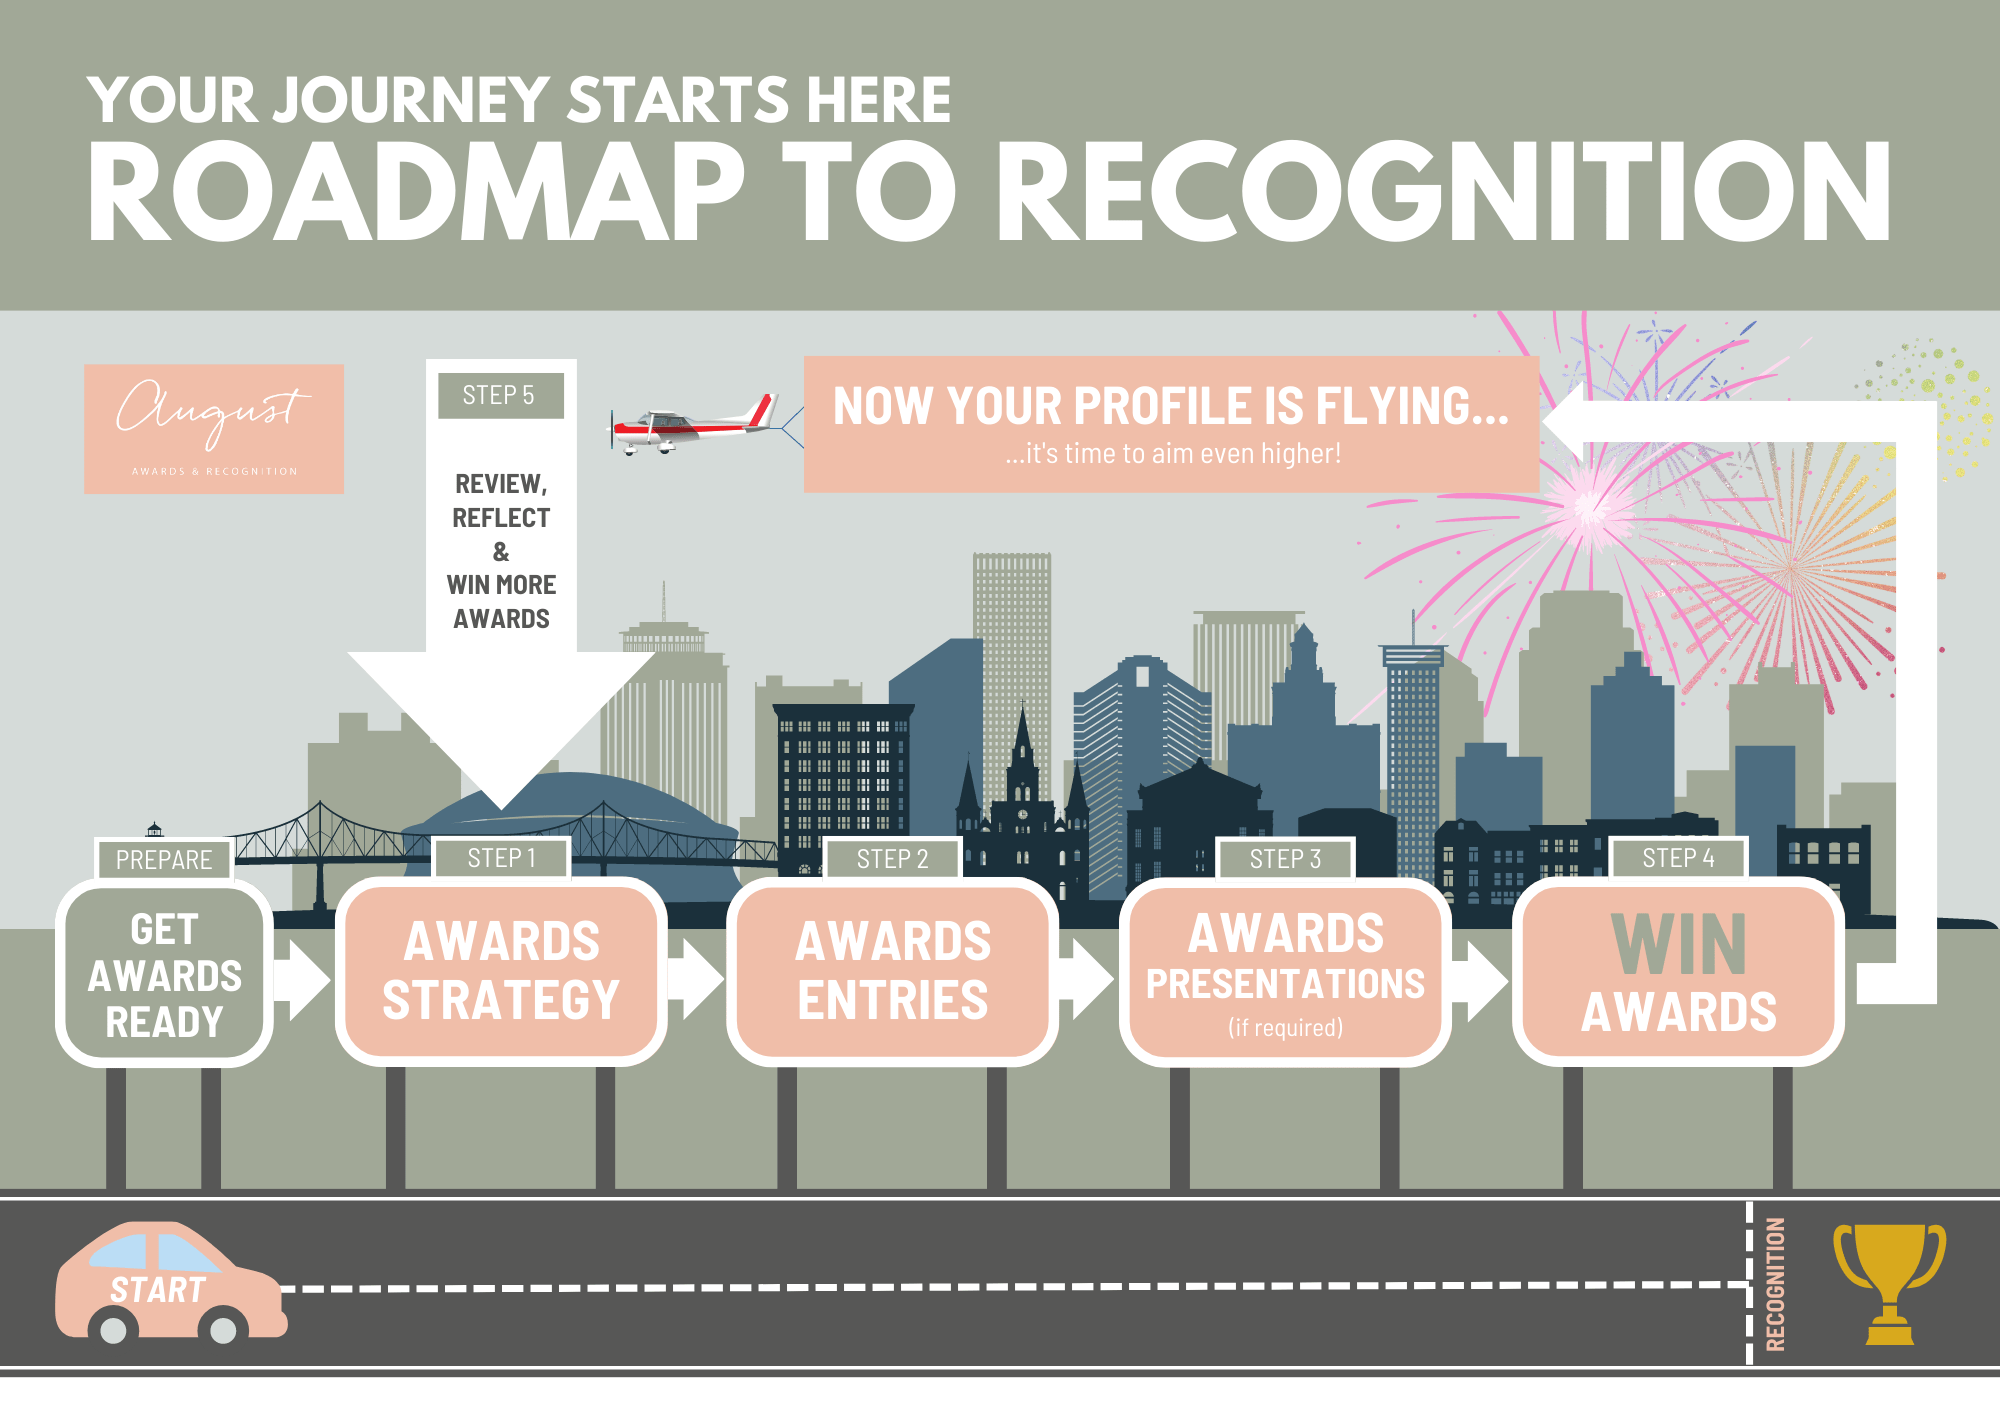 ROADMAP TO RECOGNITION